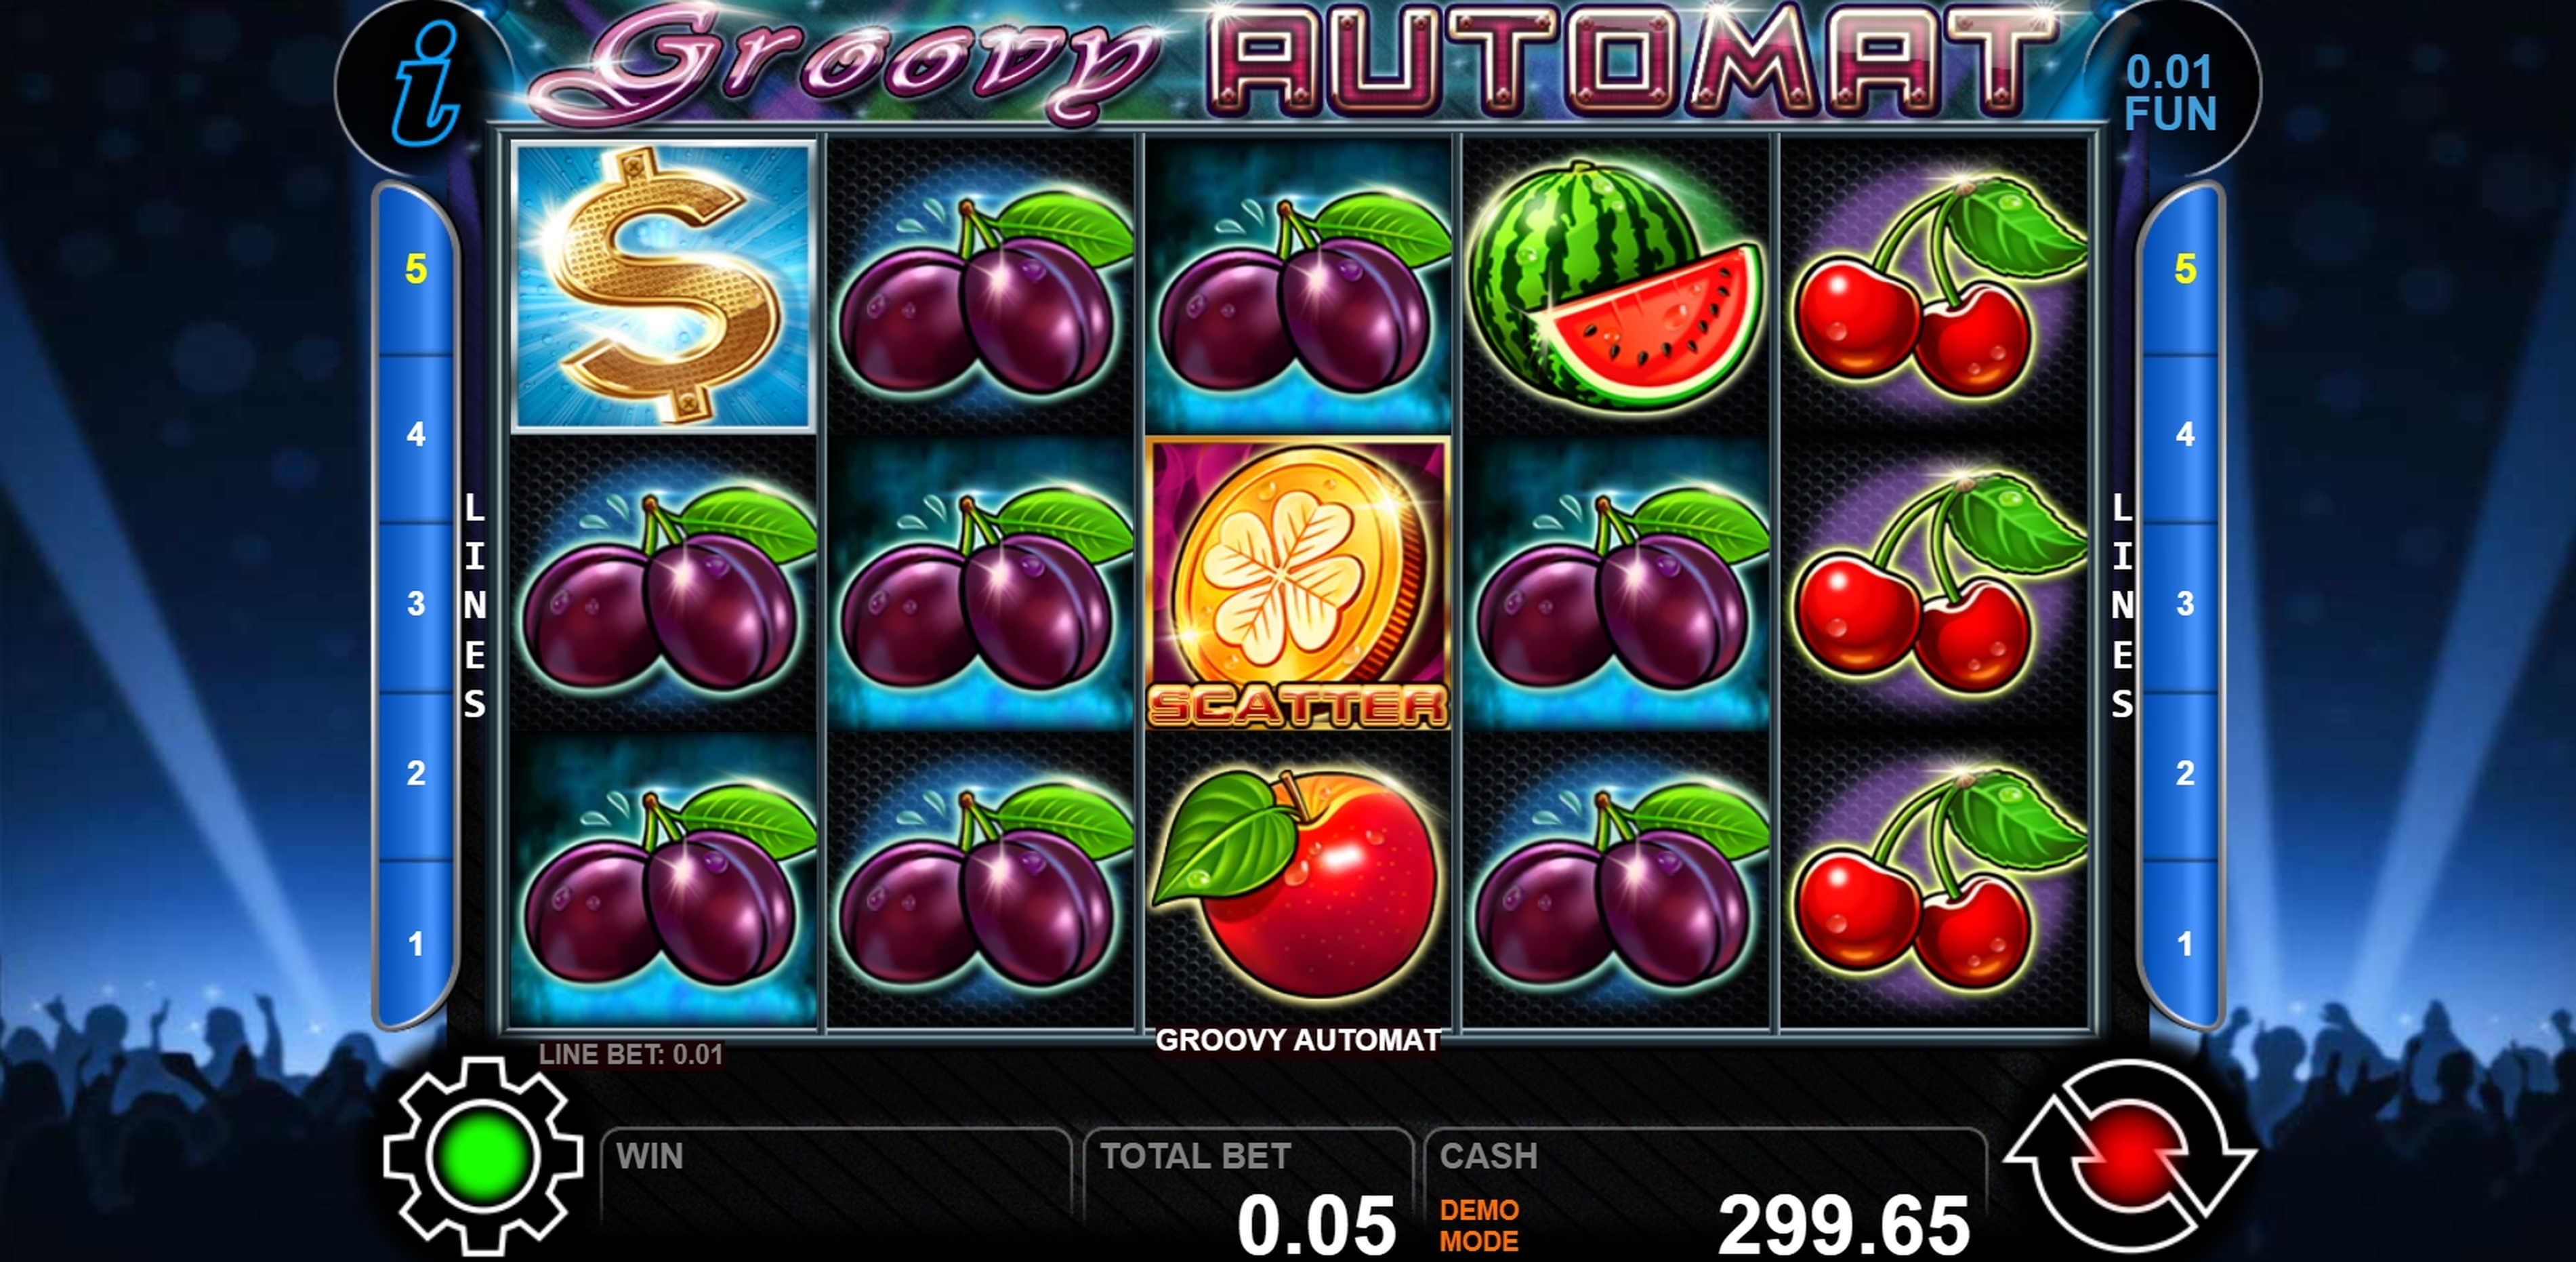 Win Money in Groovy Automat Free Slot Game by casino technology